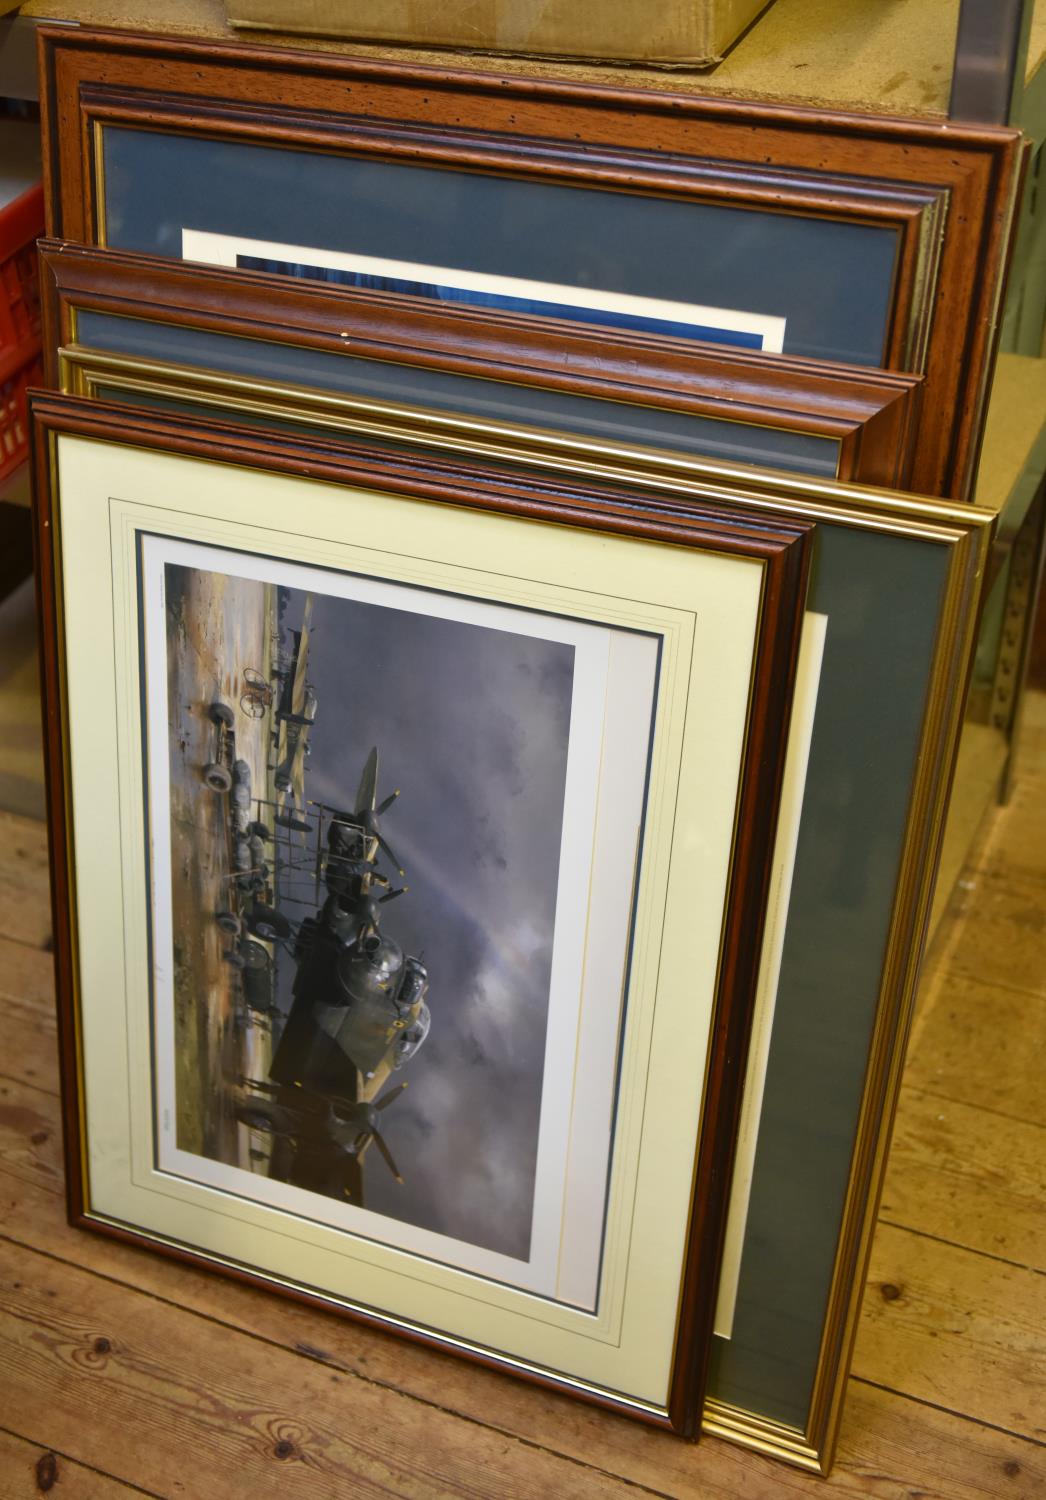 6x Framed prints of military aircraft and ships. All limted edition signed prints very well - Image 2 of 2